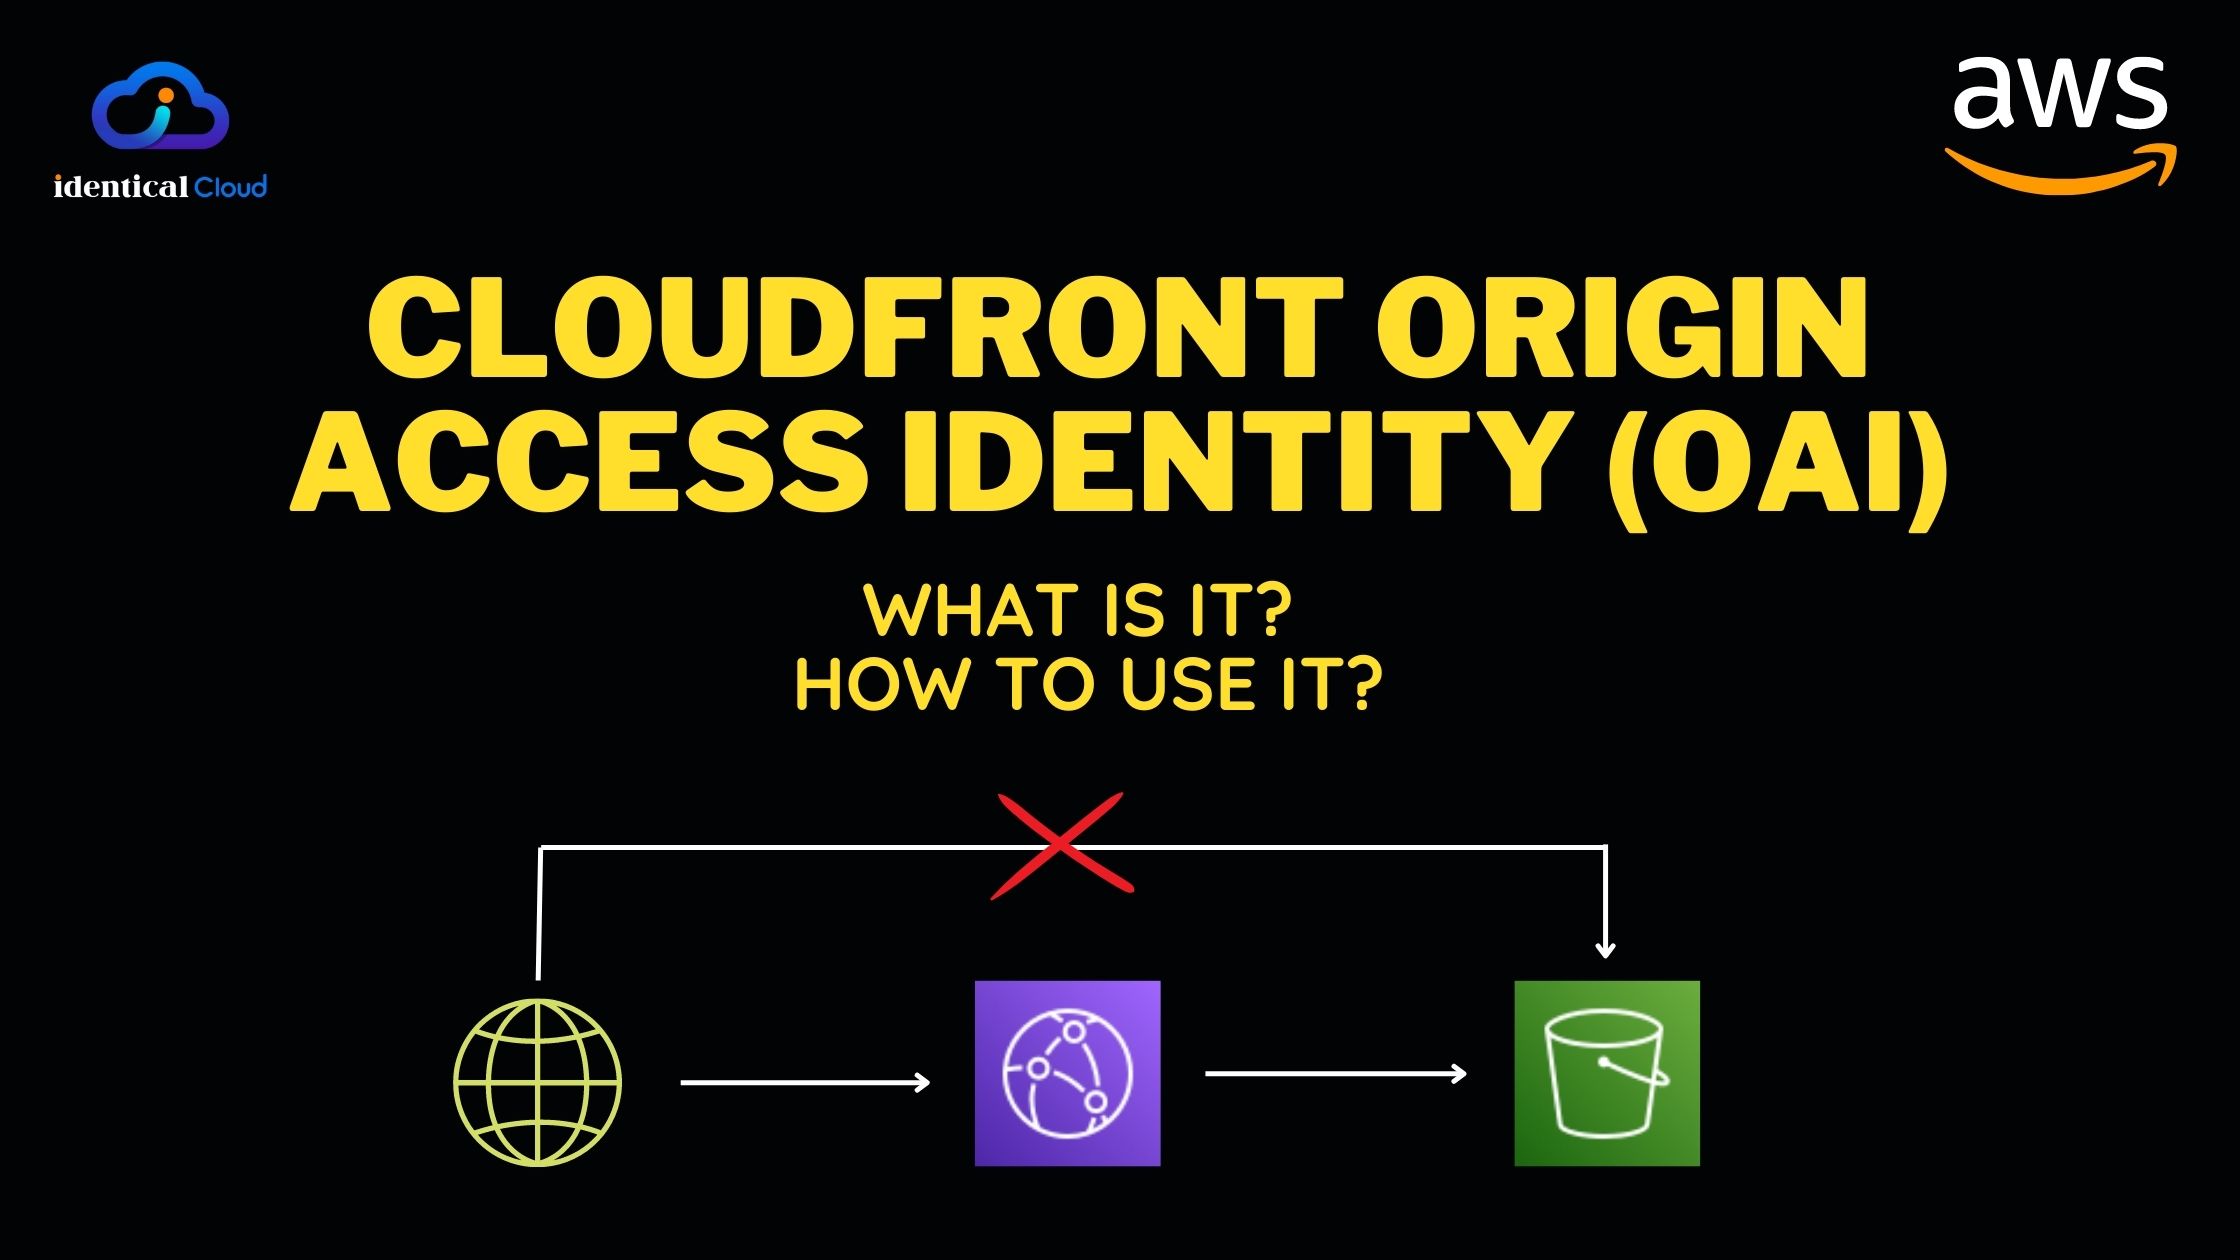 Cloudfront Origin Access Identity (OAI) - What is it and How to use it - identicalcloud.com